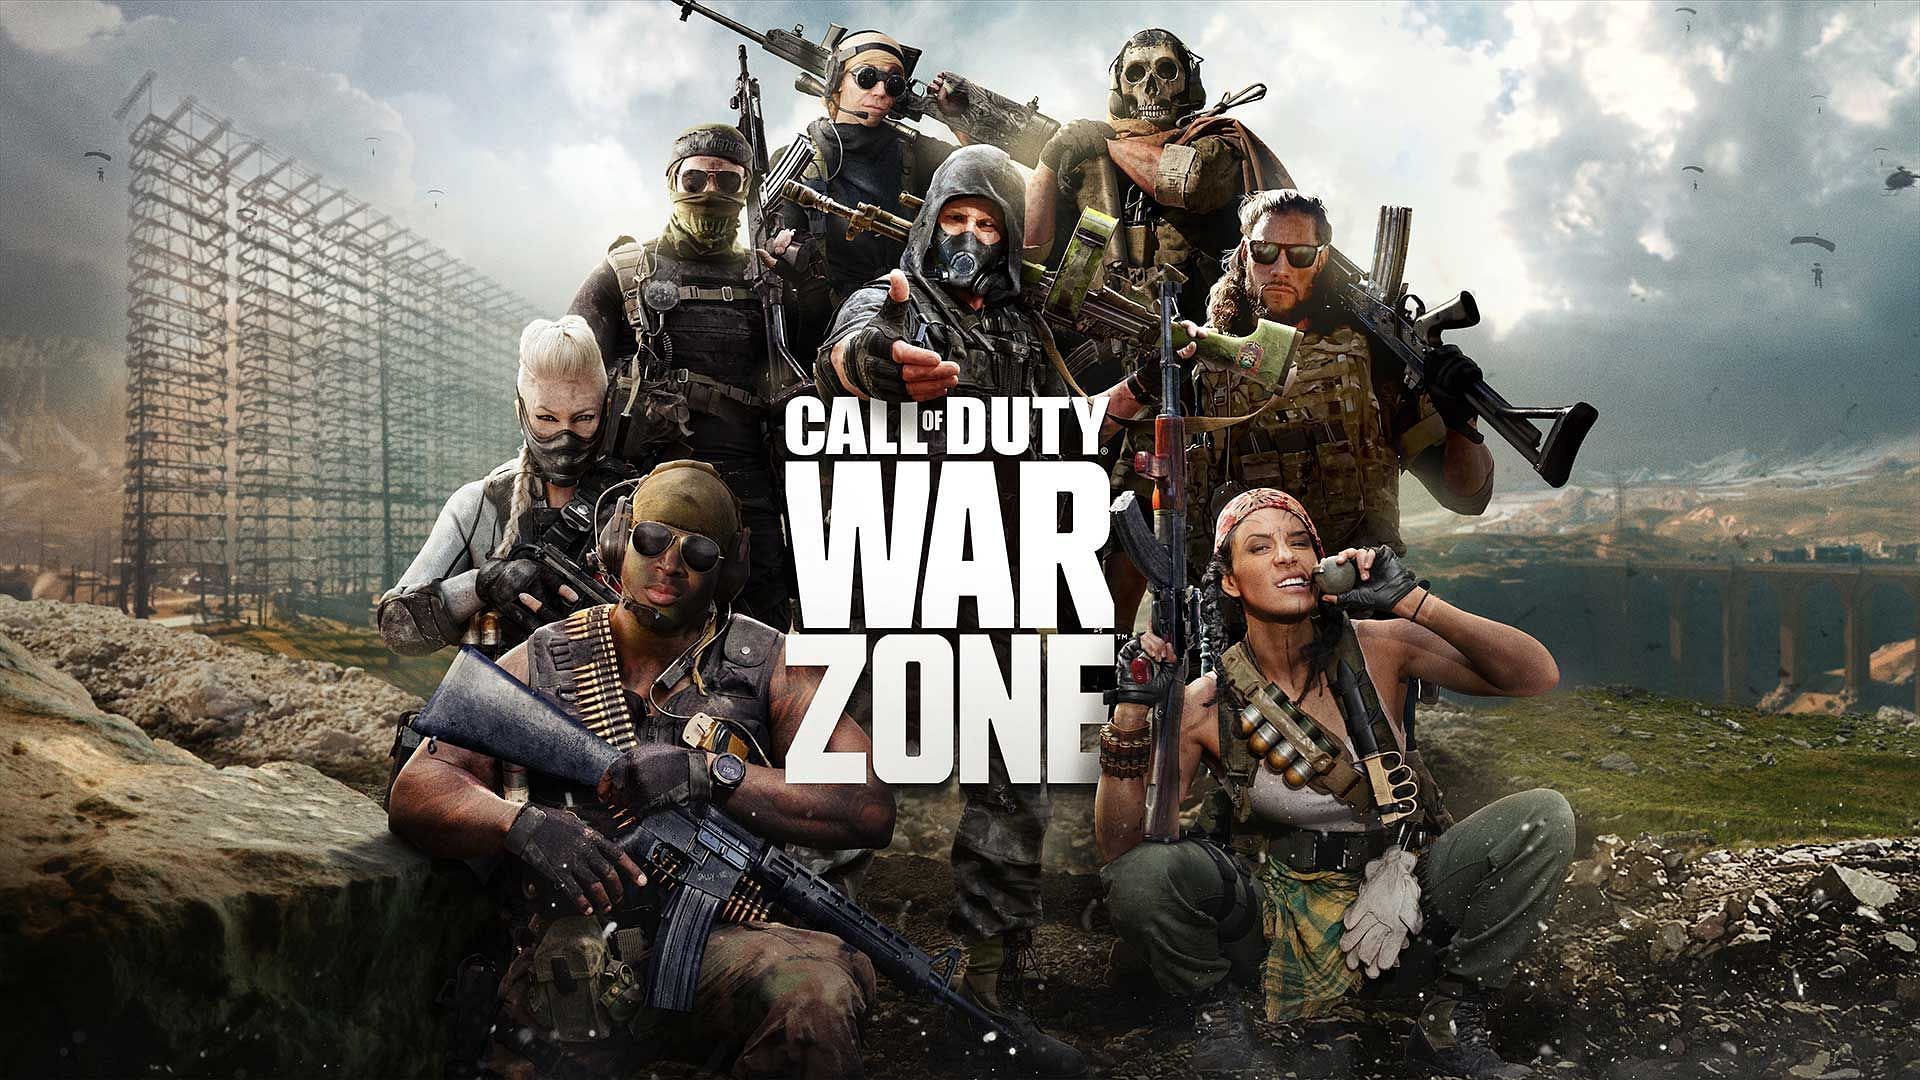 Android games like Call of Duty Warzone (Image via Call of Duty)